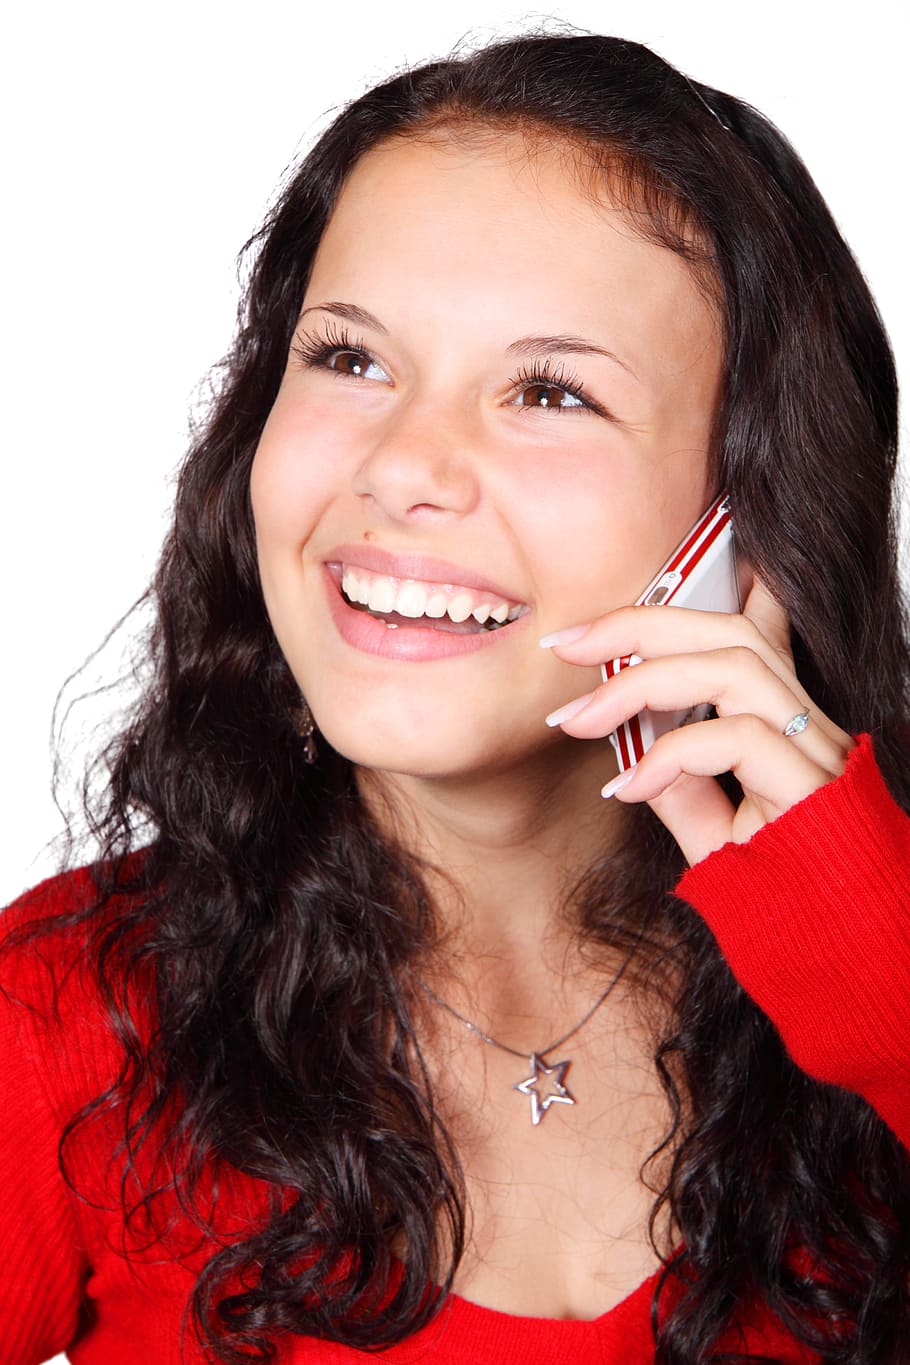 girl, wearing, red, top, call, calling, cell, cellphone, cellular, communication